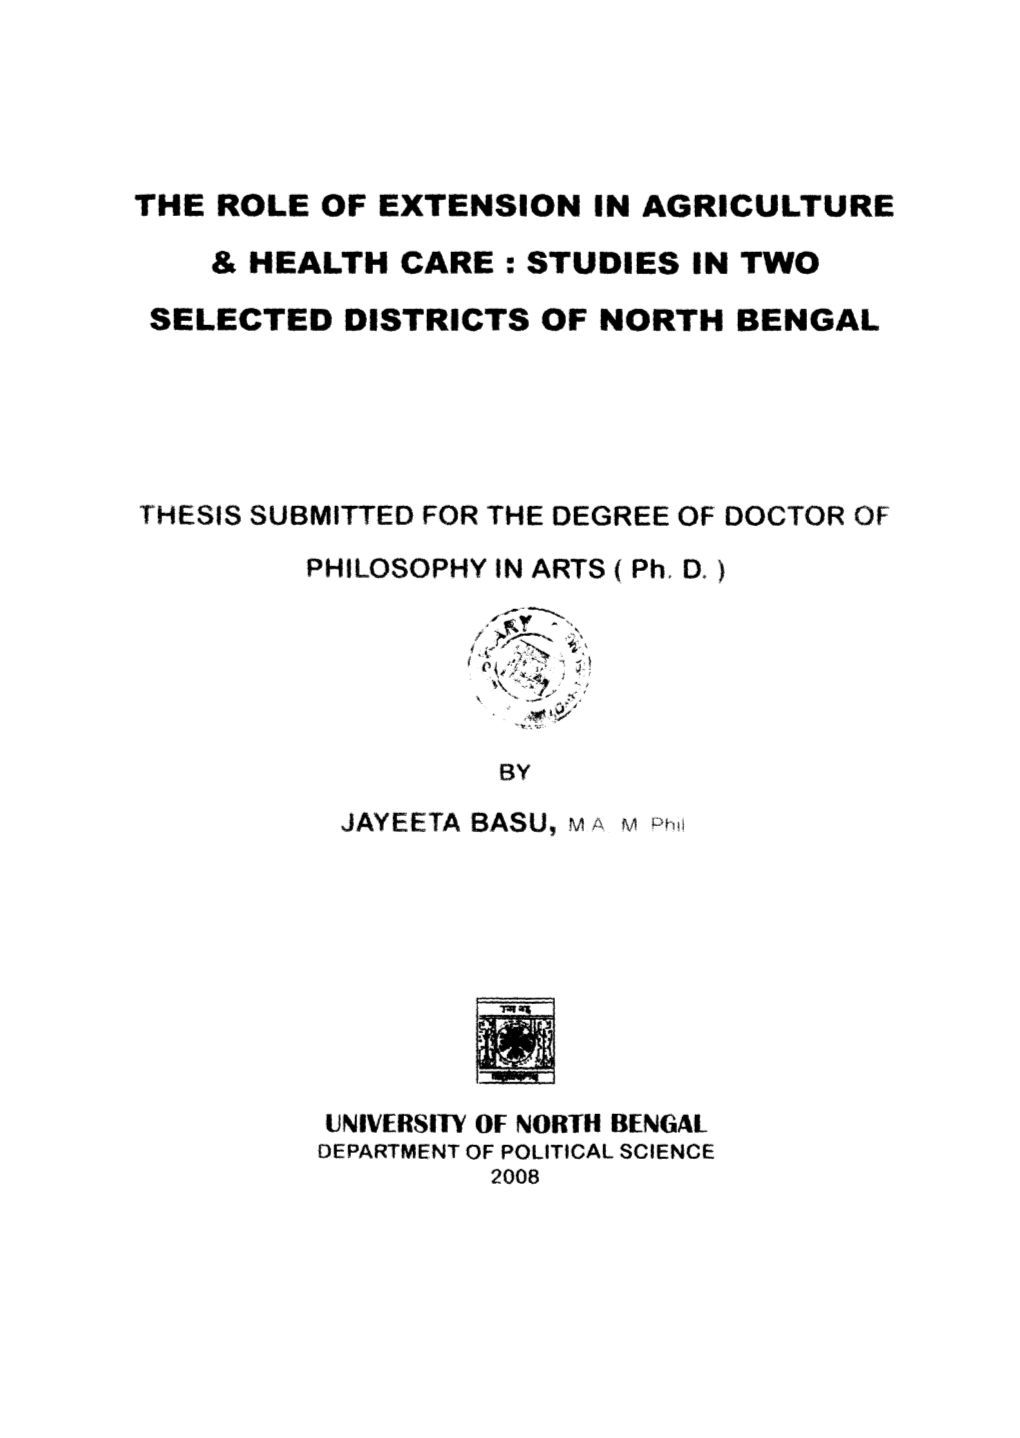 The Role of Extension in Agriculture & Health Care: Studies in Two Selected